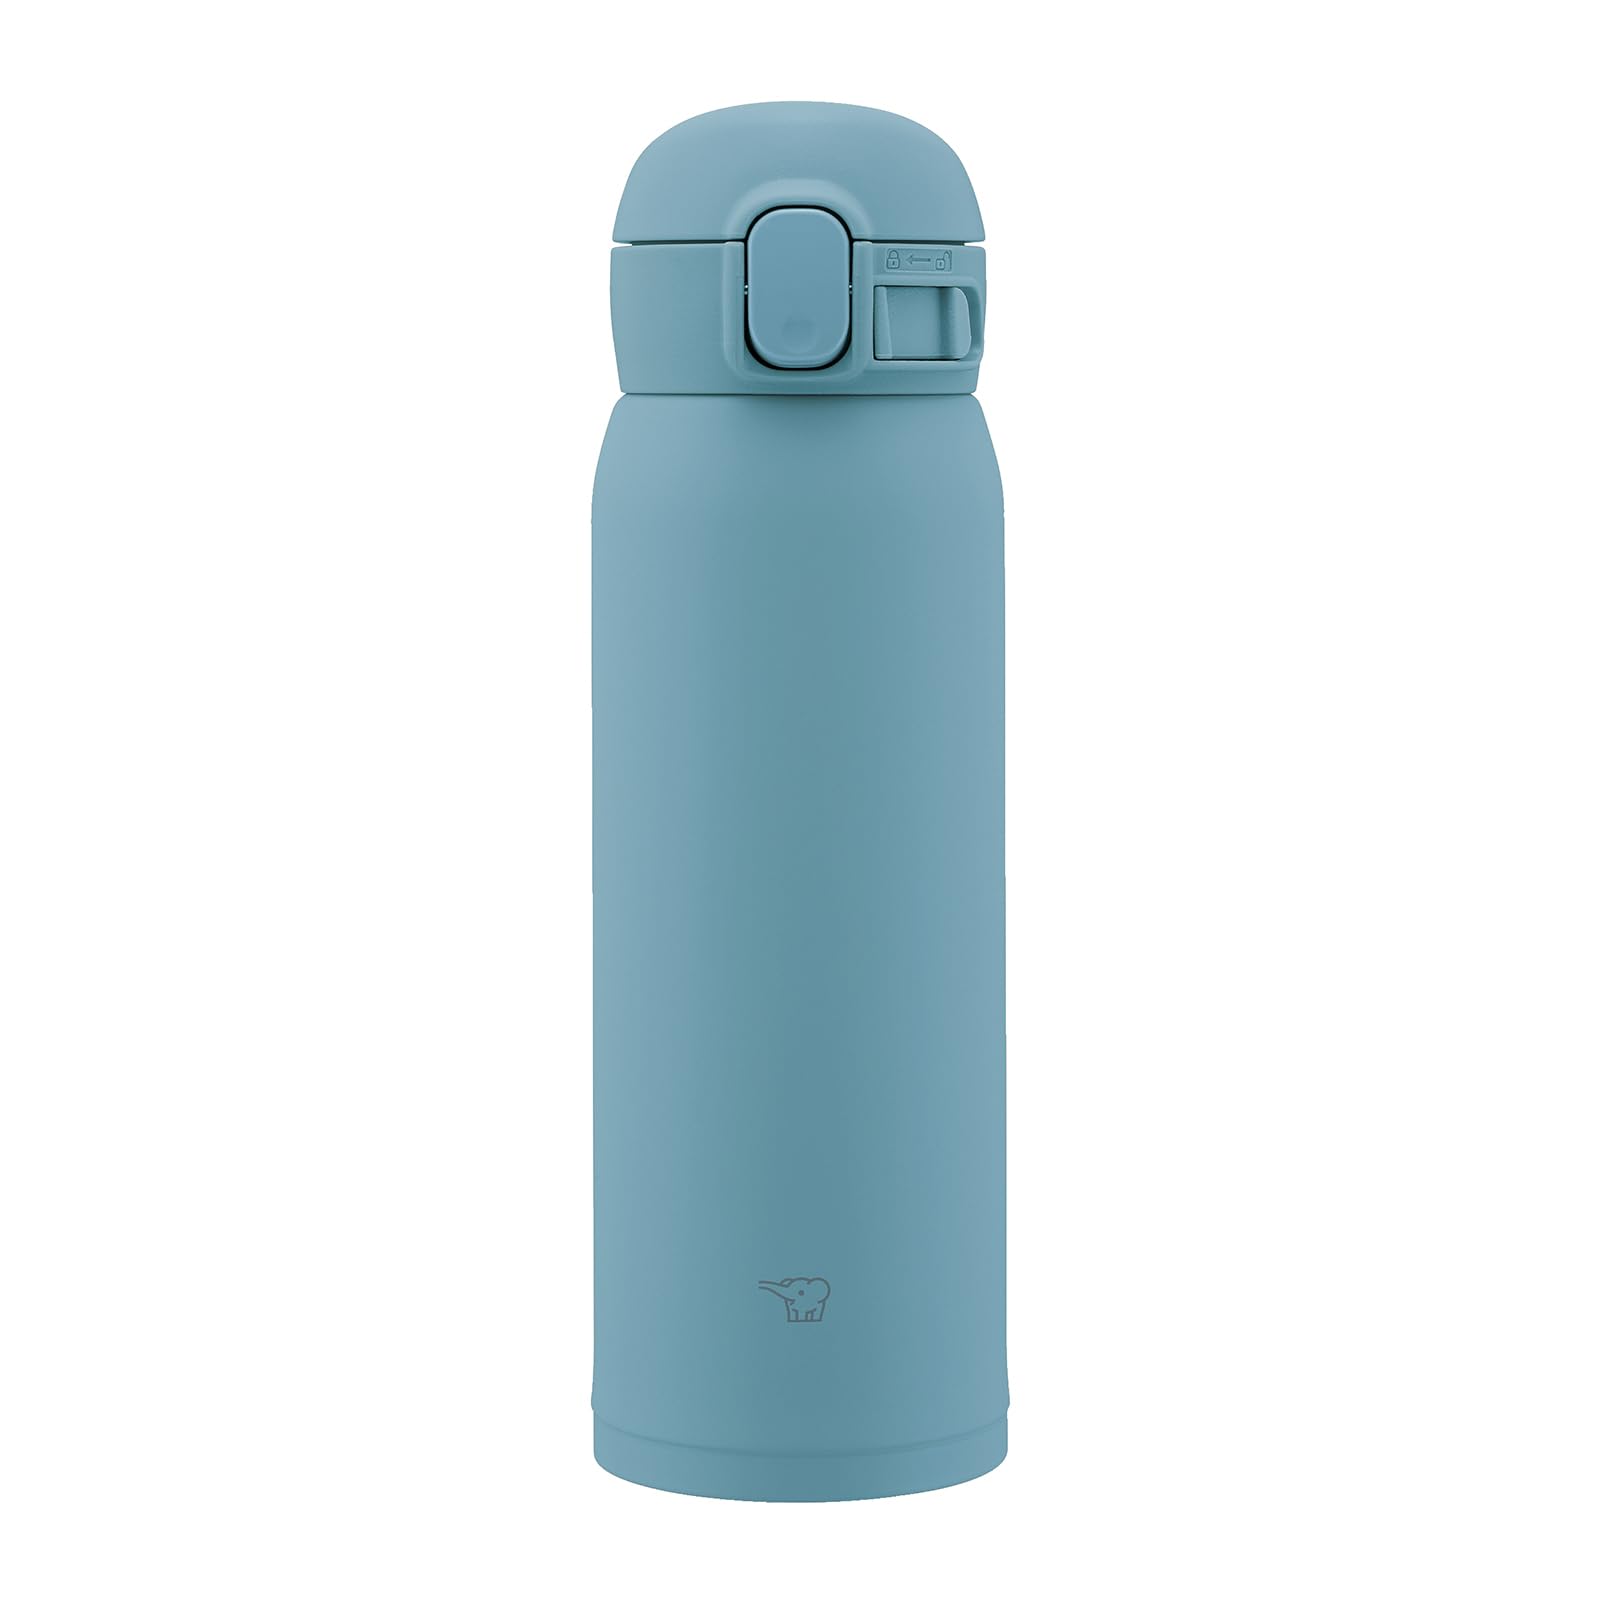 https://japanwithlovestore.com/cdn/shop/products/Zojirushi-Mahobin-Water-Bottle-Seamless-480Ml-One-Touch-Stainless-Steel-Mug-Aqua-Green-Only-3-Items-To-Wash-With-Integrated-Packing-SmWs48Gm-Japan-With-Love-4974305224620-0.jpg?v=1696517551